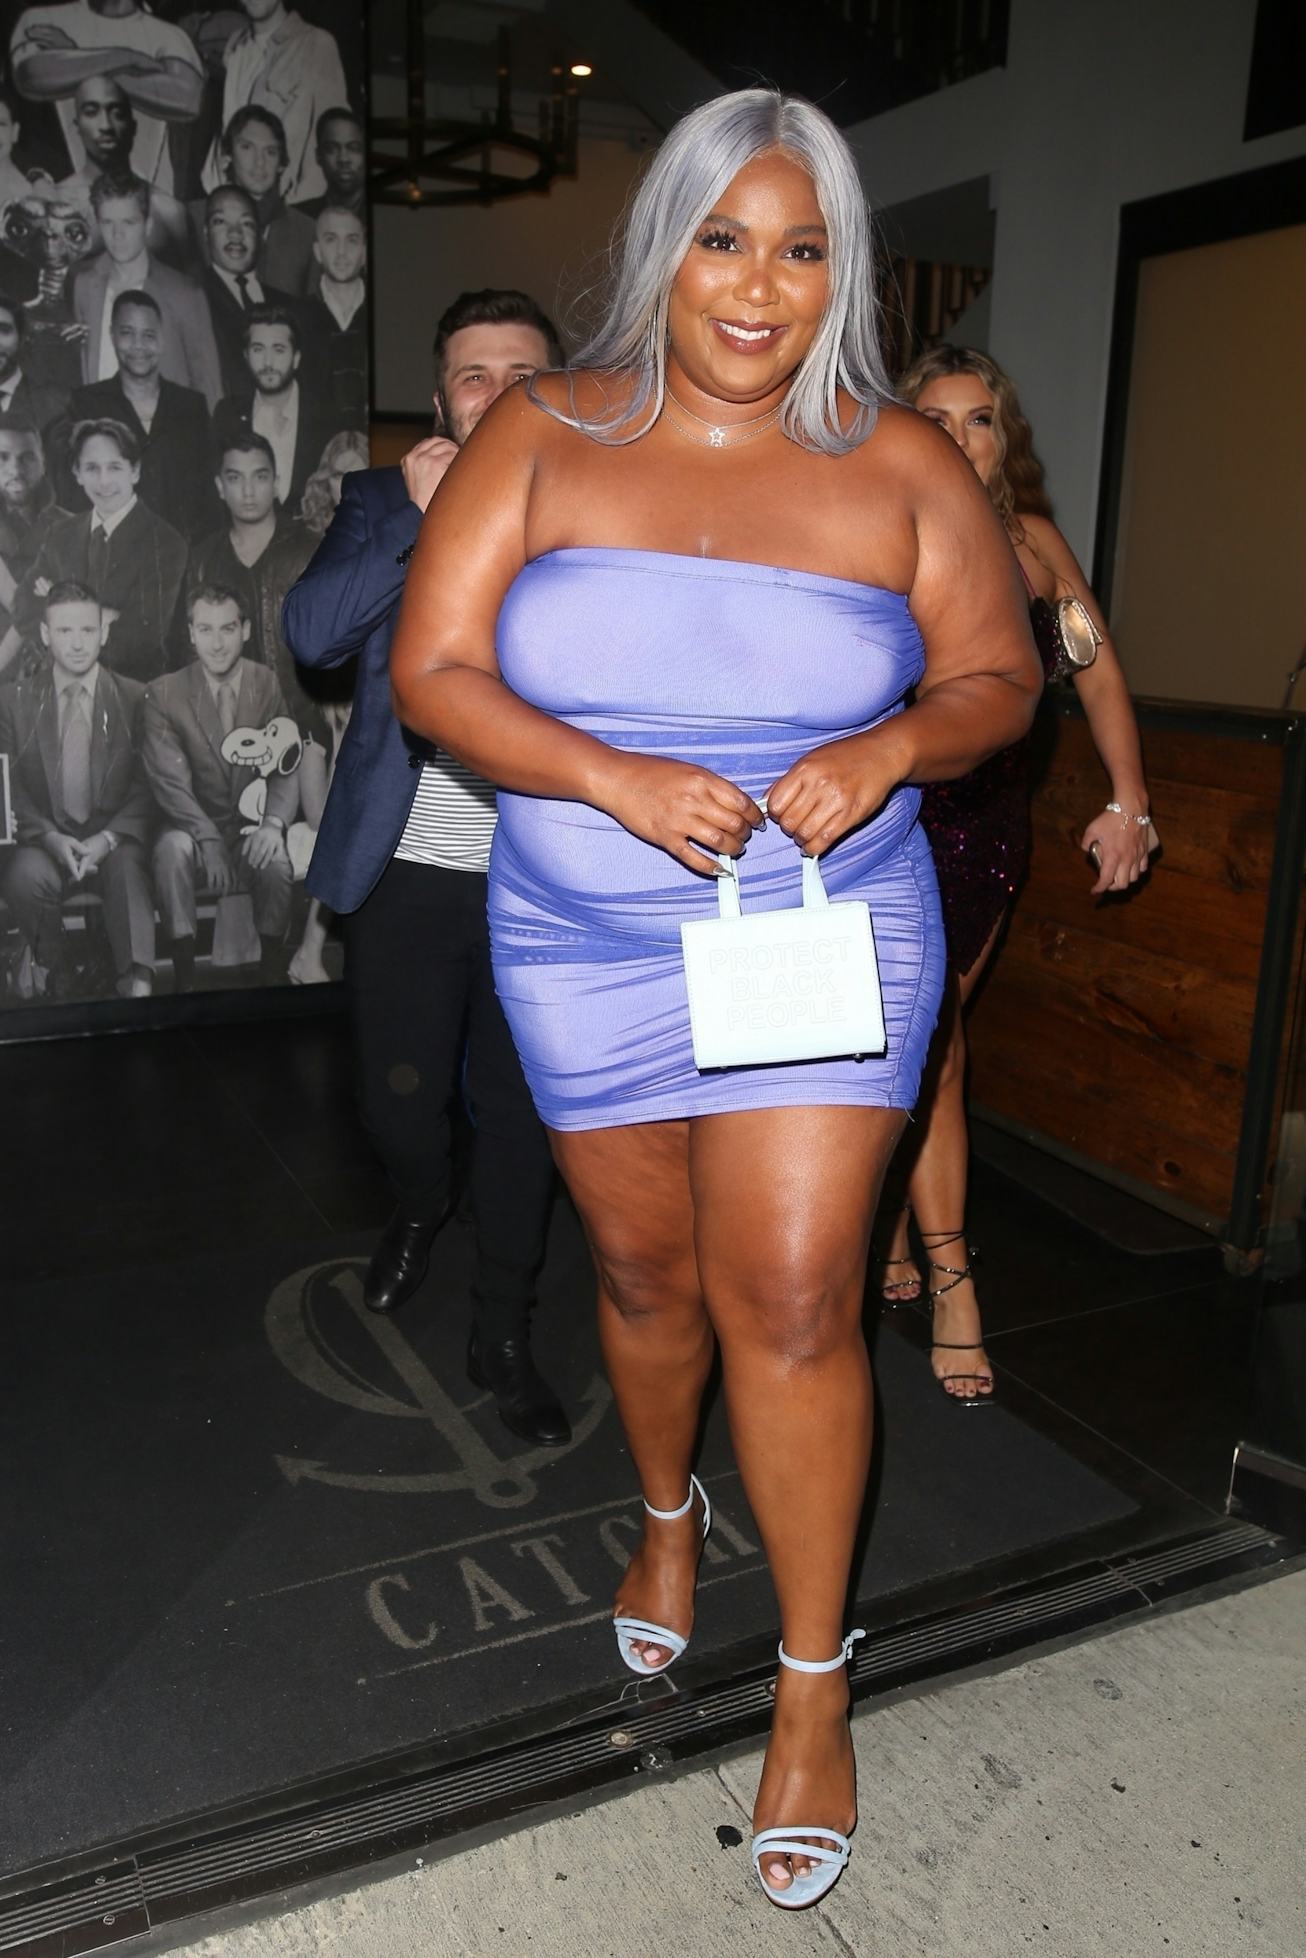 Lizzo leaving dinner at Catch LA in West Hollywood after celebrating her friends’ birthday.